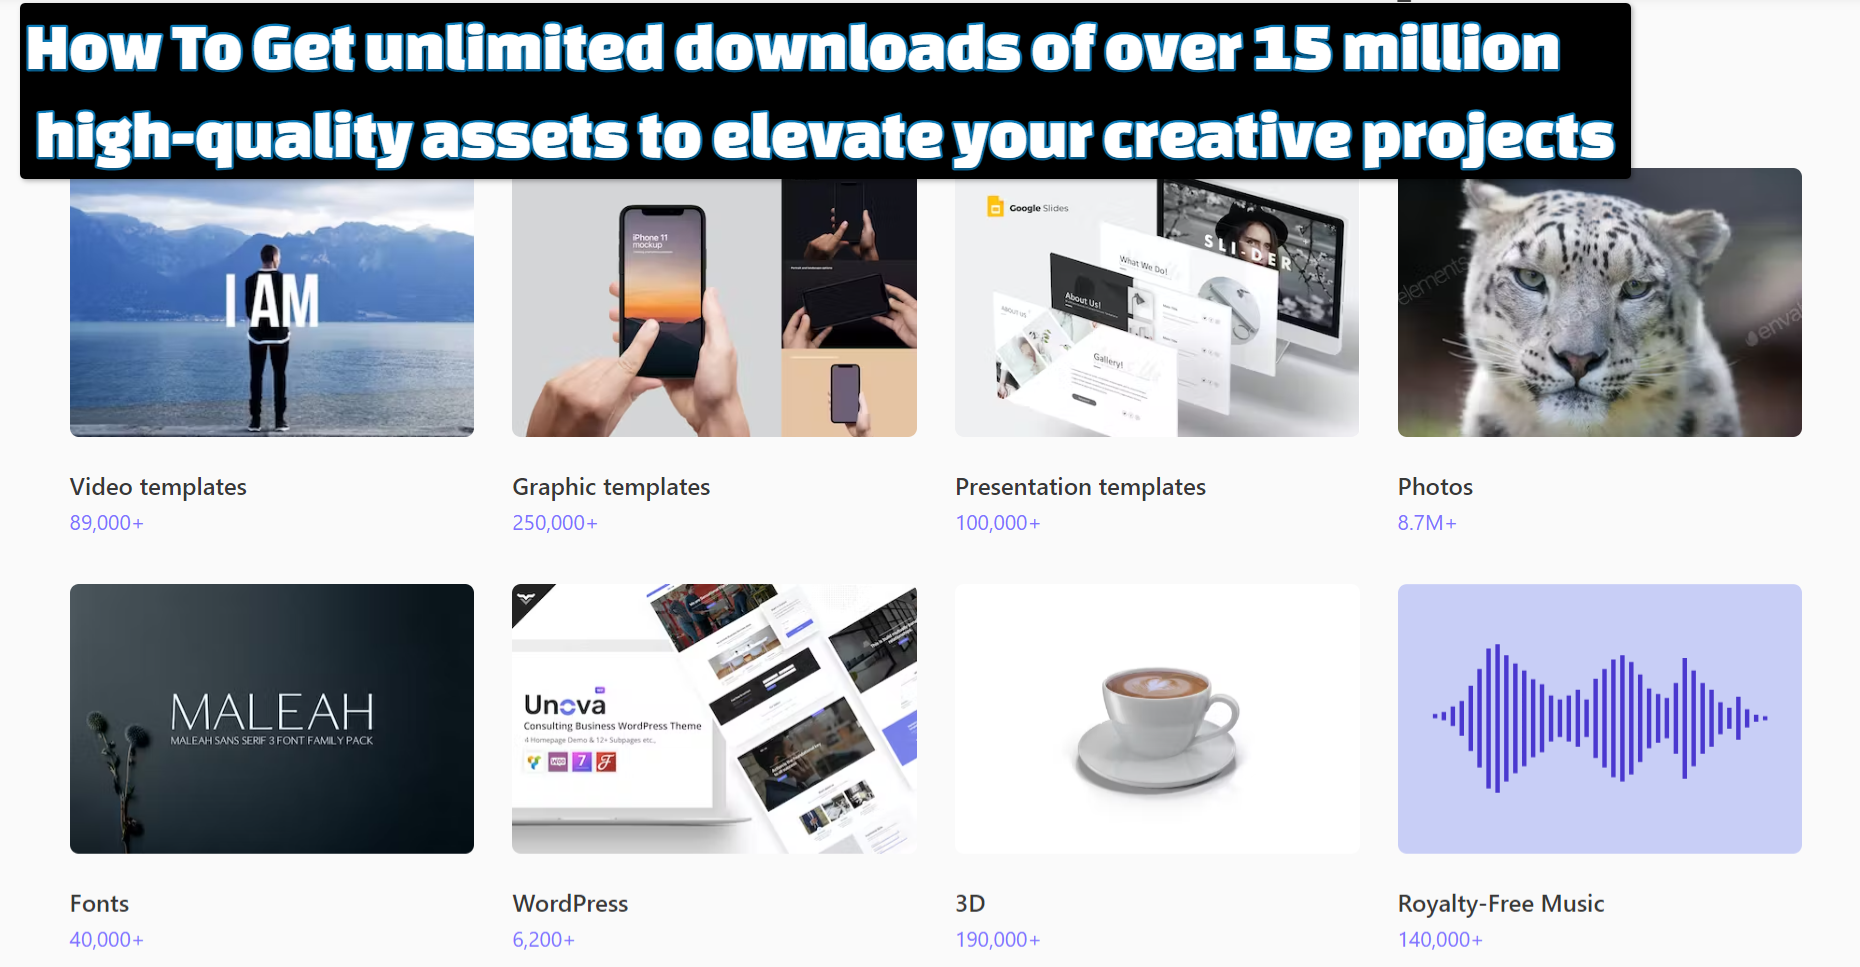 How To Get unlimited downloads of over 15 million high quality assets to elevate your creative projects How To Get unlimited downloads of over 15 million high-quality assets to elevate your creative projects